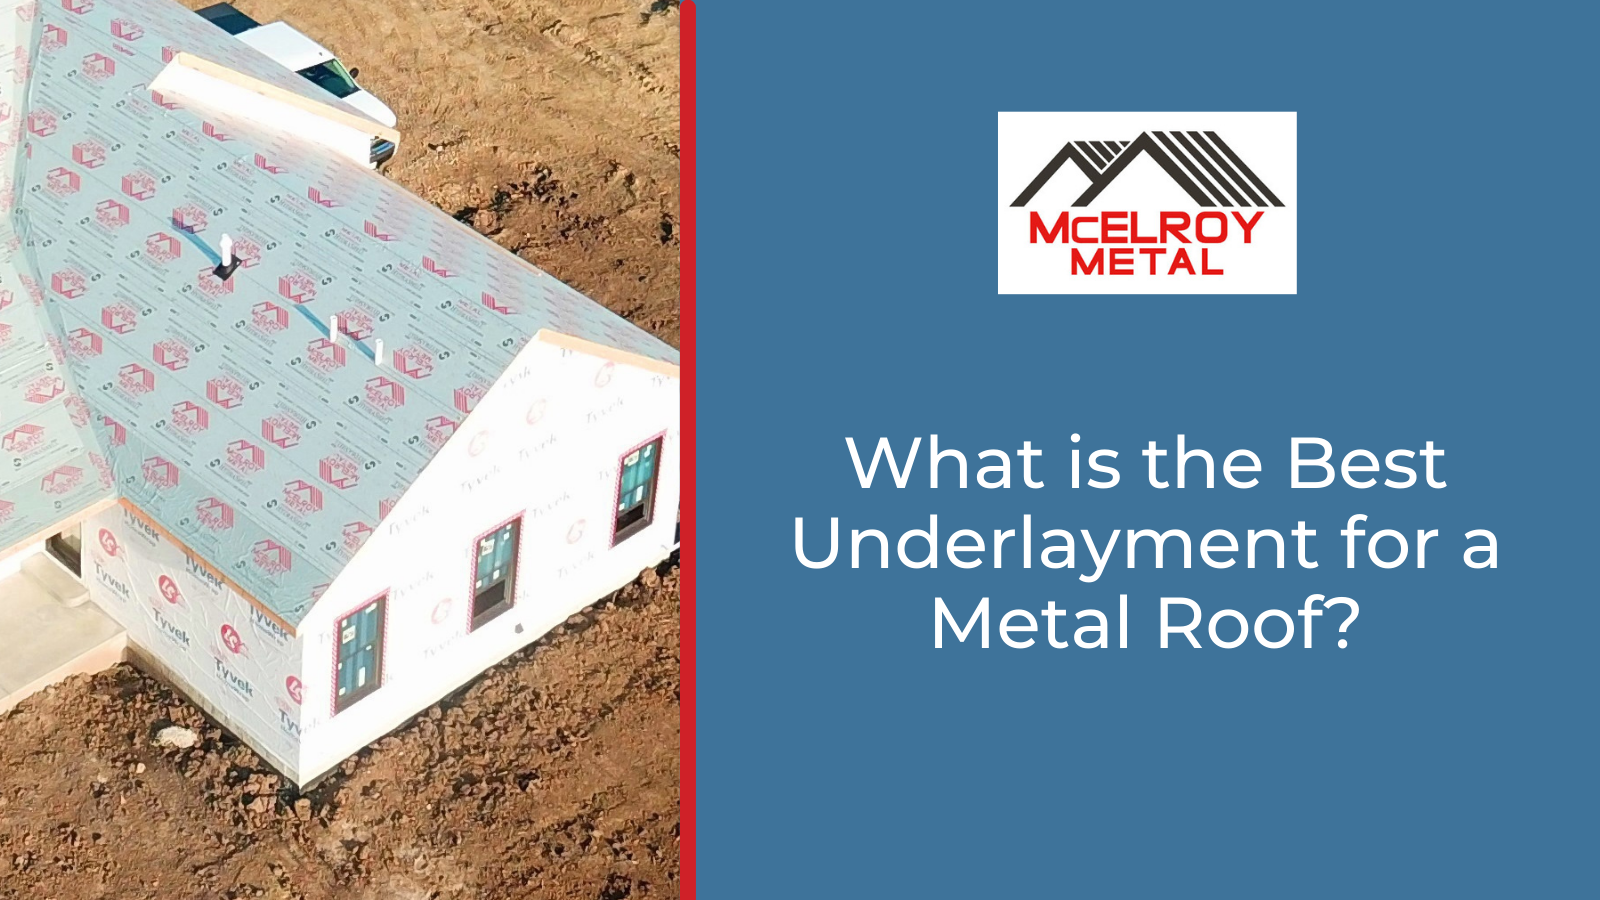 What is the Best Underlayment for a Metal Roof?